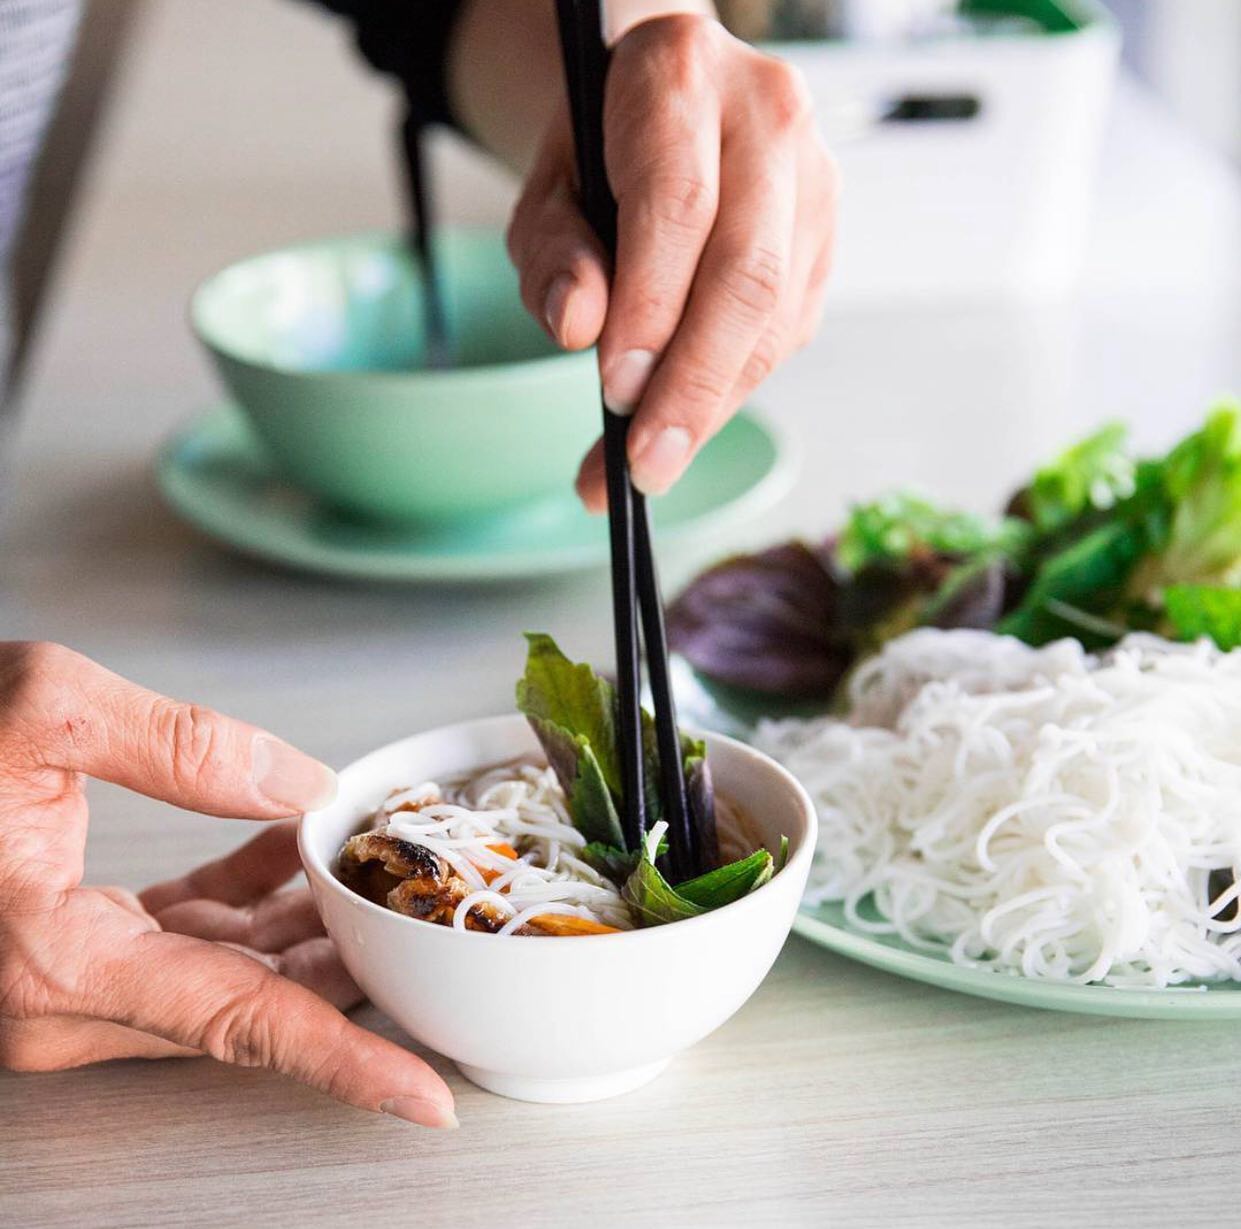 Our specialty dish, Bun Tron, served with charcoal grilled pork or chicken, vermicelli, herbs, lettuce, and special sauce. Best enjoyed with a glass of red, we're licensed and ready for your visit. #hanoirose